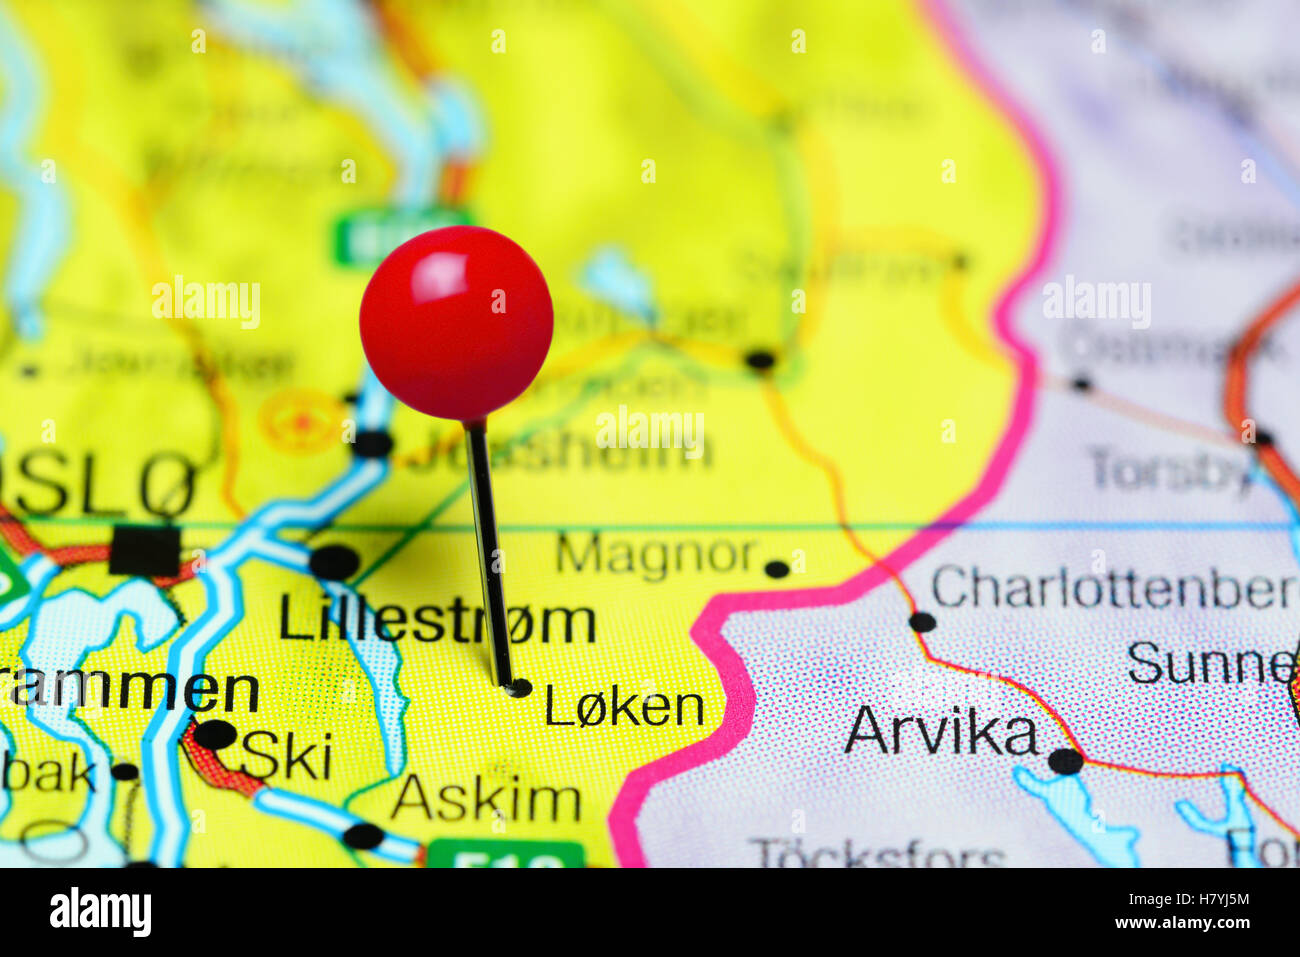 Loken pinned on a map of Norway Stock Photo